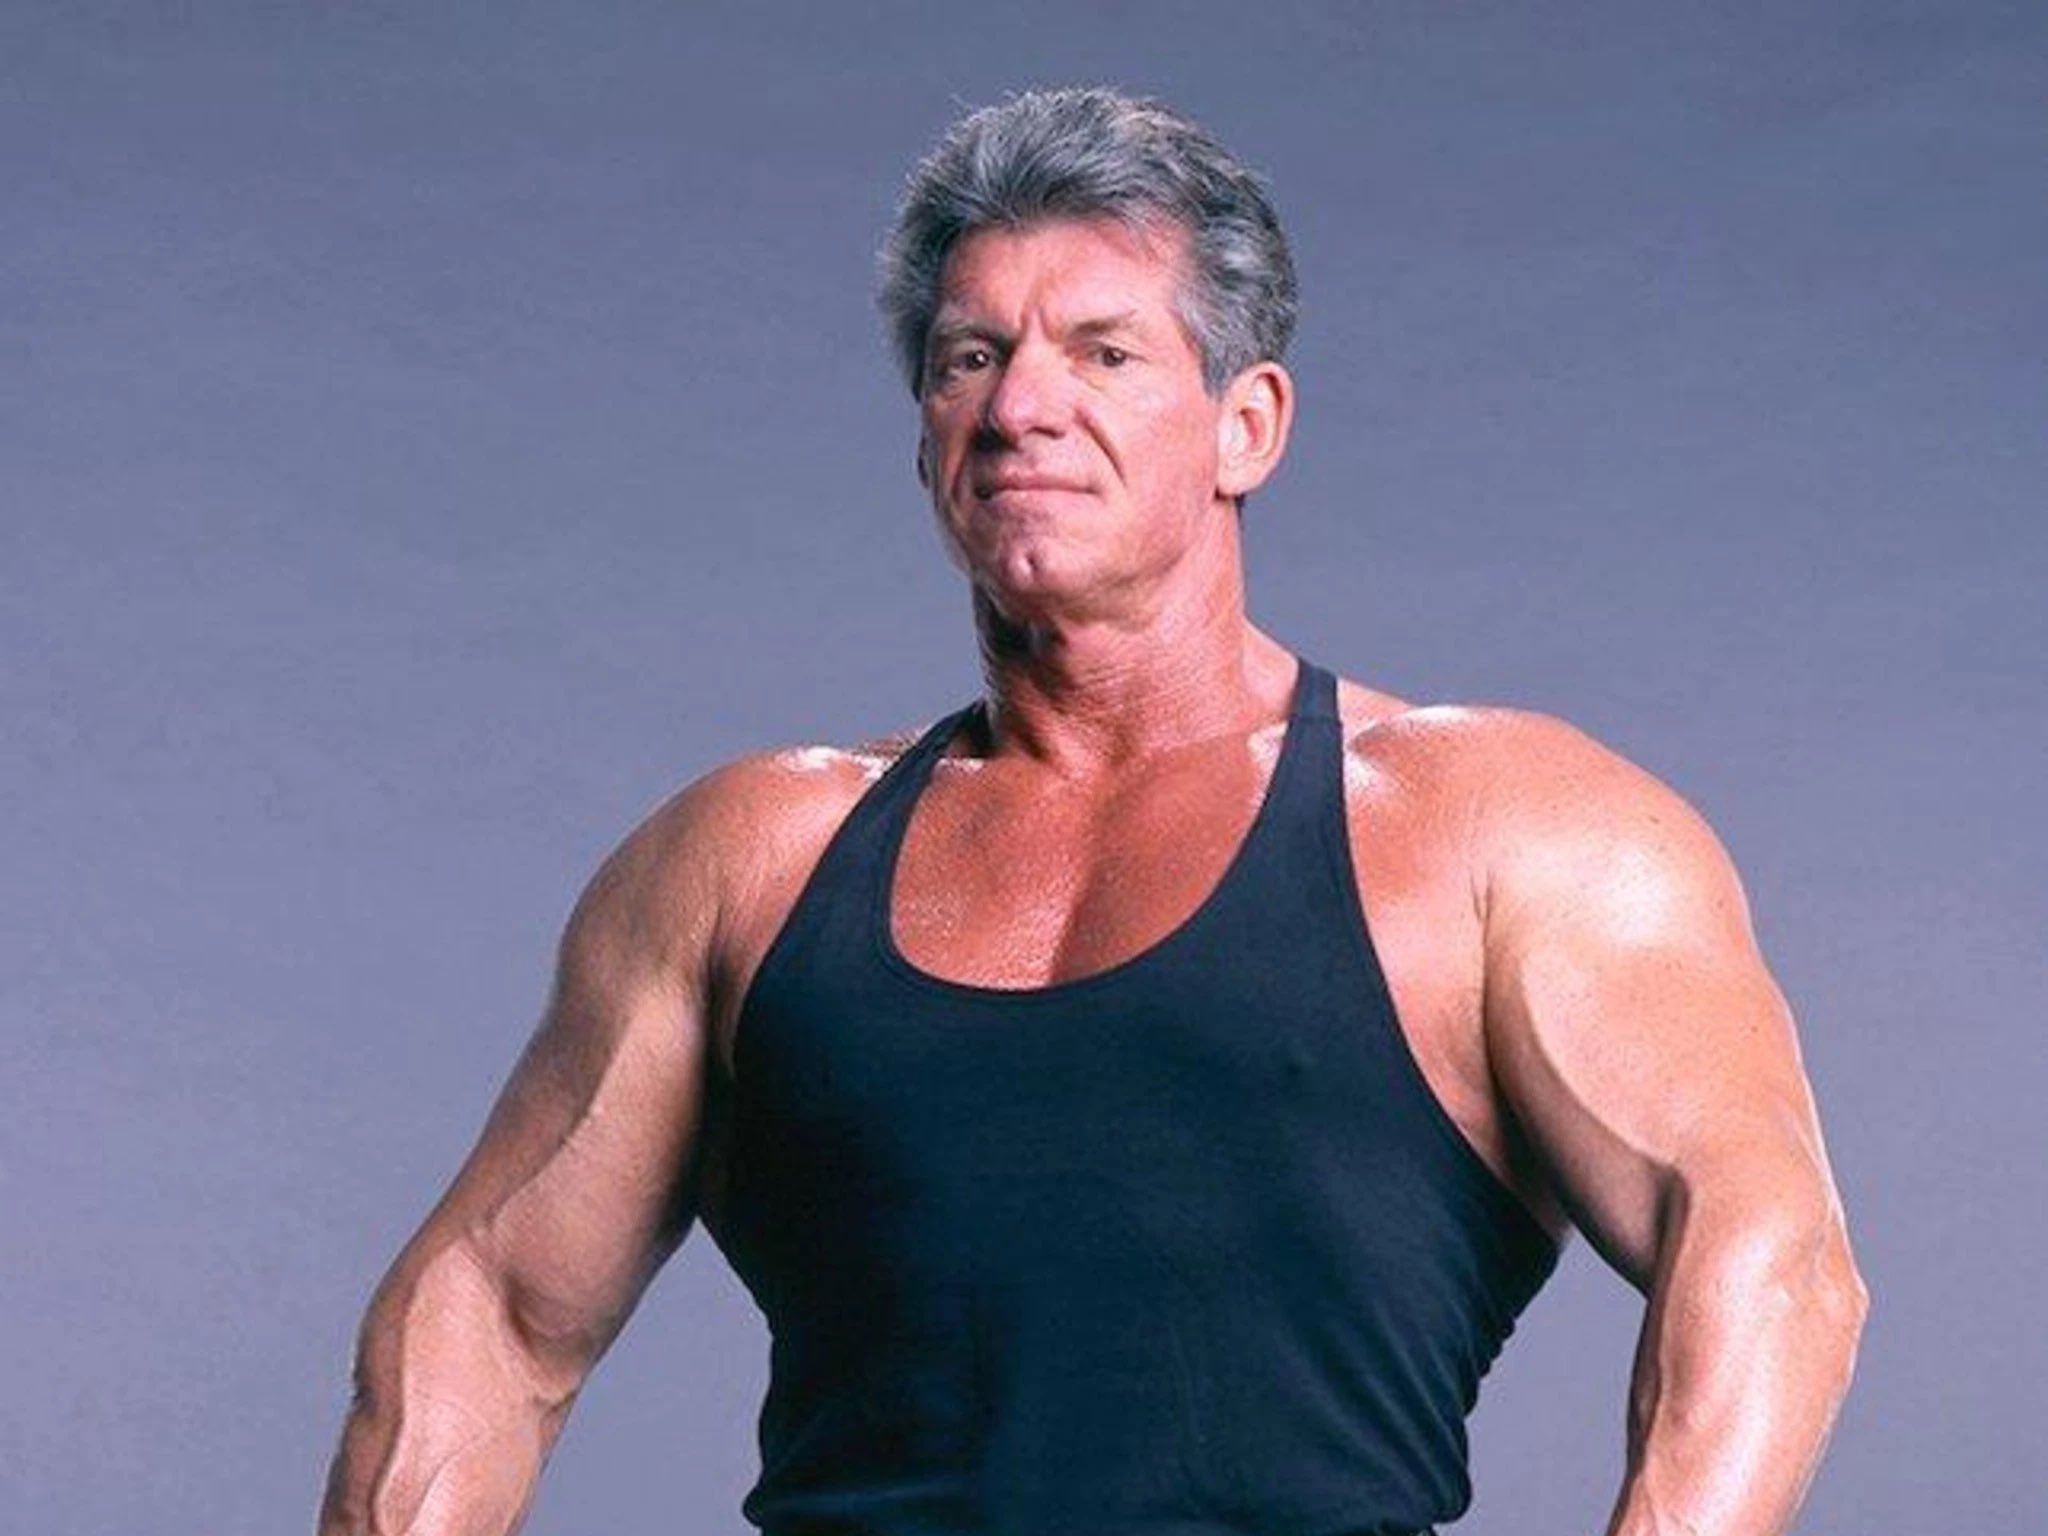 Happy birthday Vince McMahon now plz stop booking like an asshole 